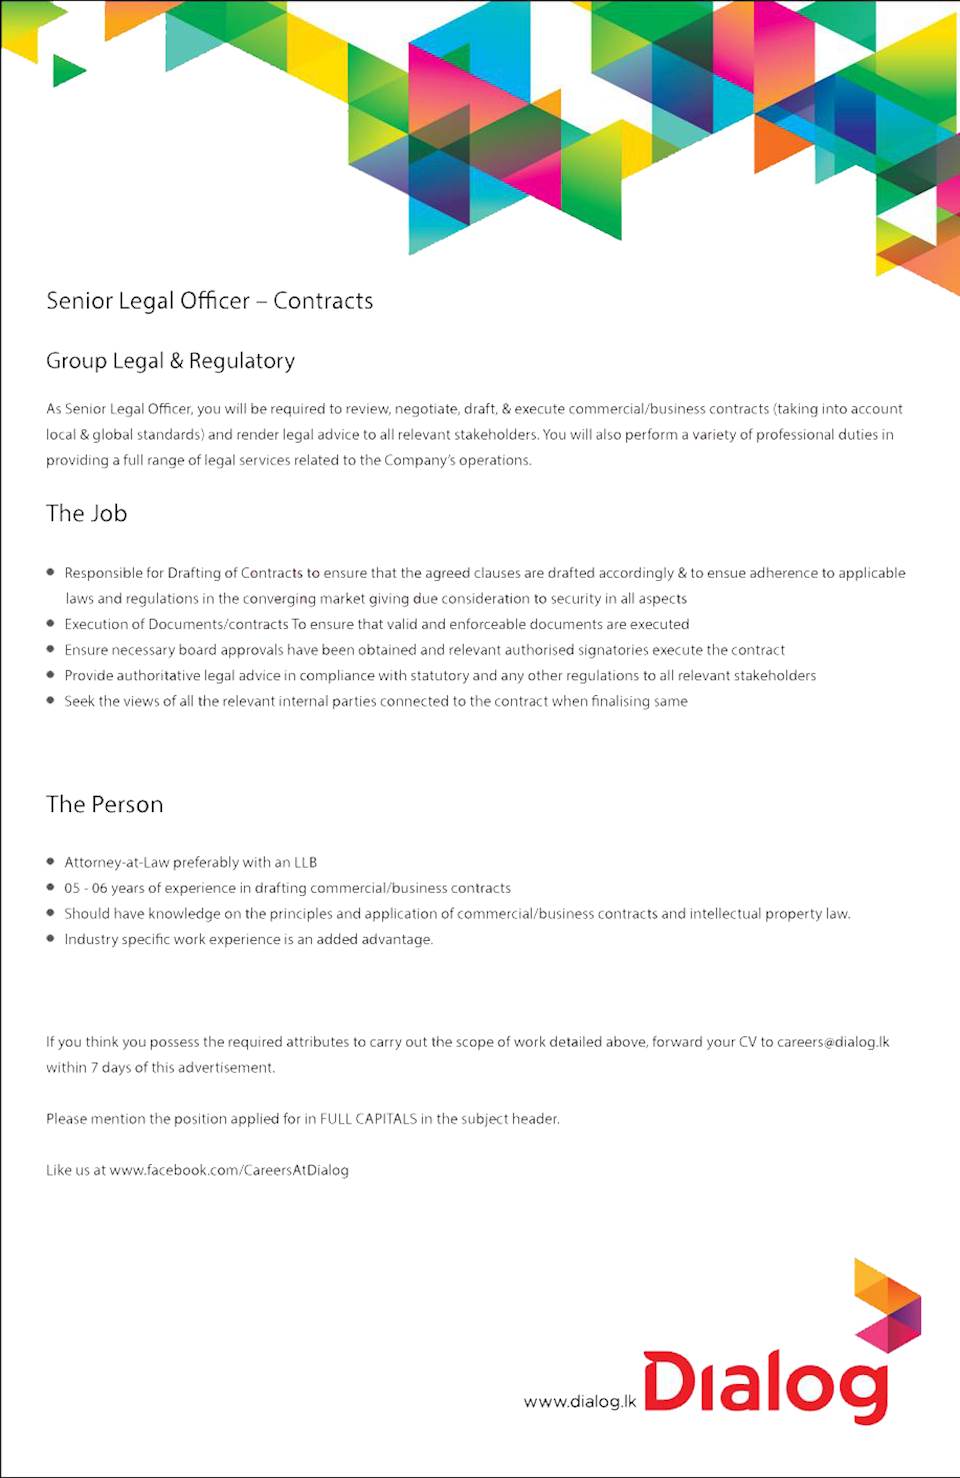 Senior Legal Officer - Contracts